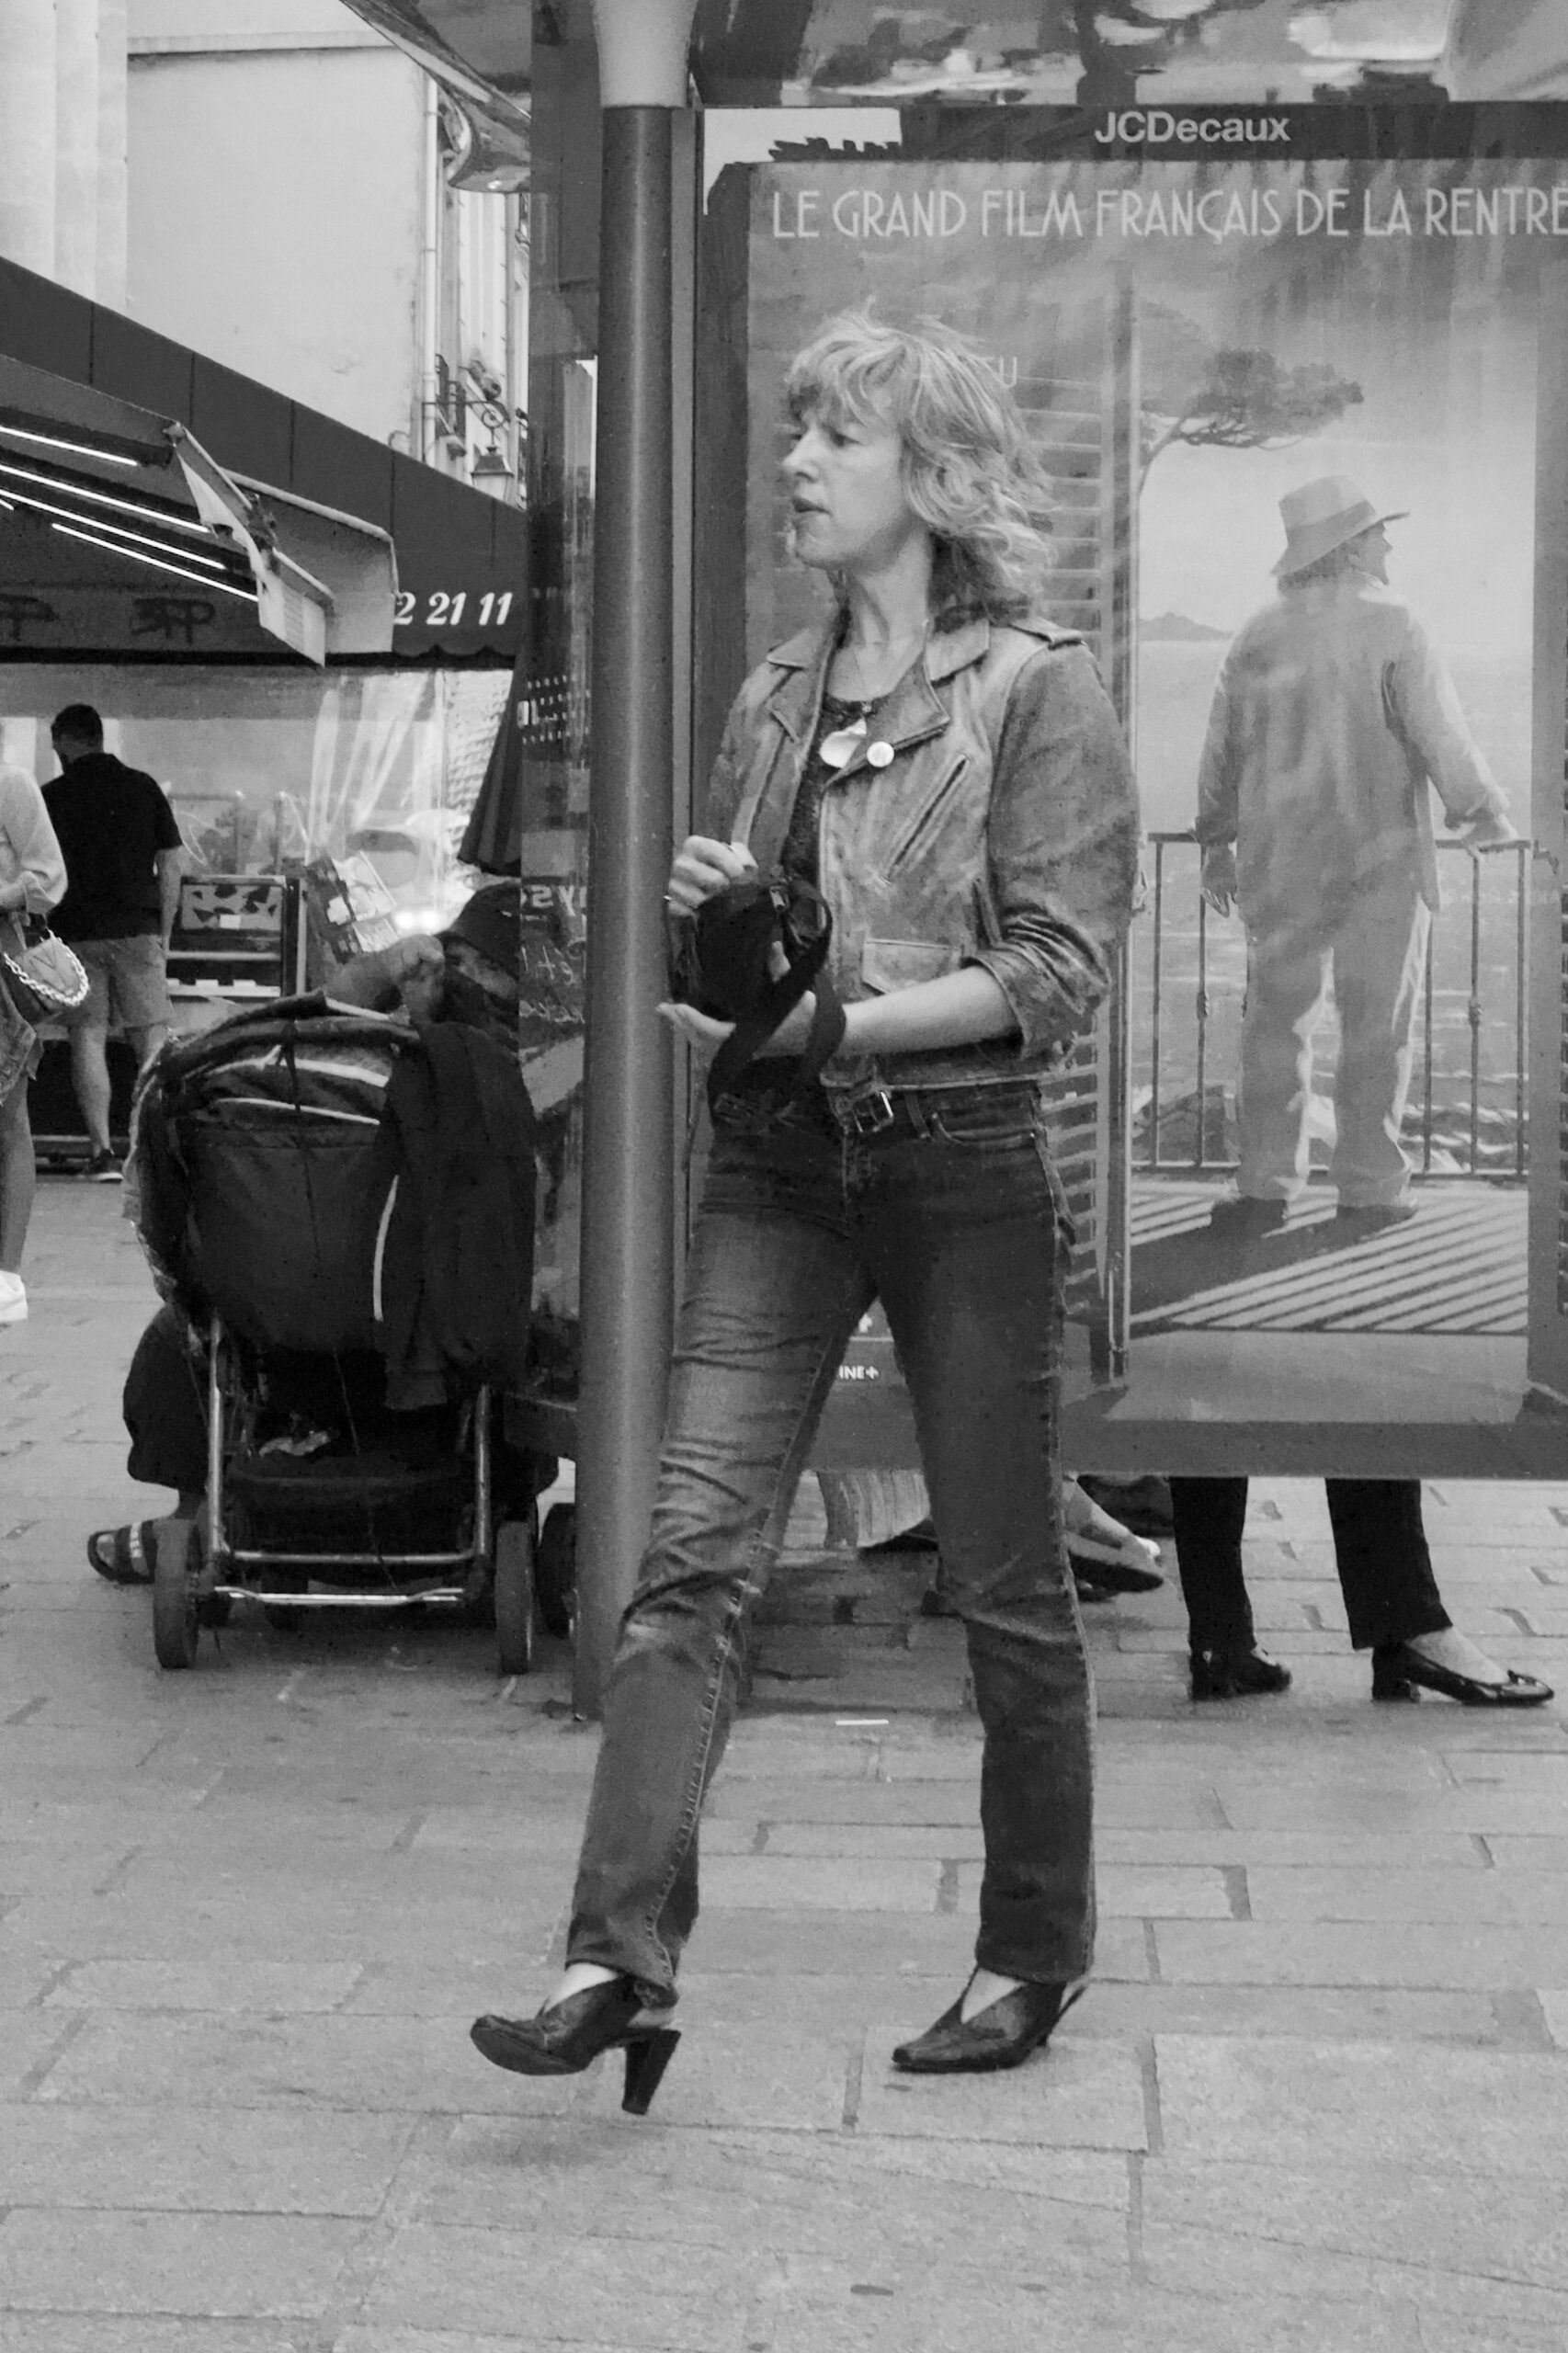 A photo of a woman walking in front of a poster